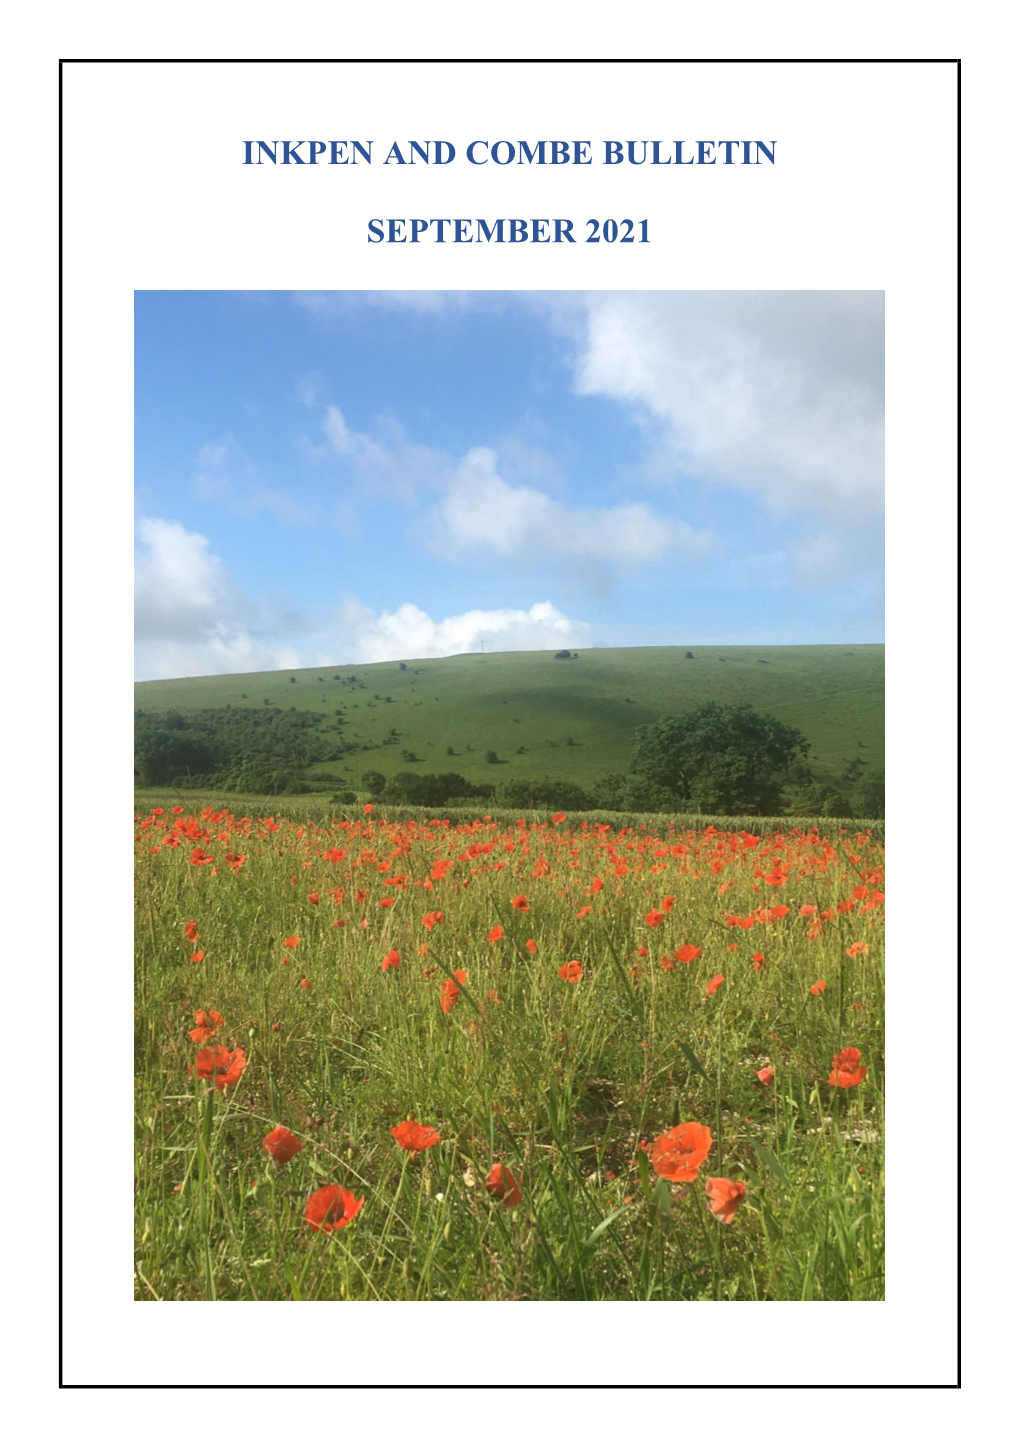 Inkpen and Combe Bulletin August 2021